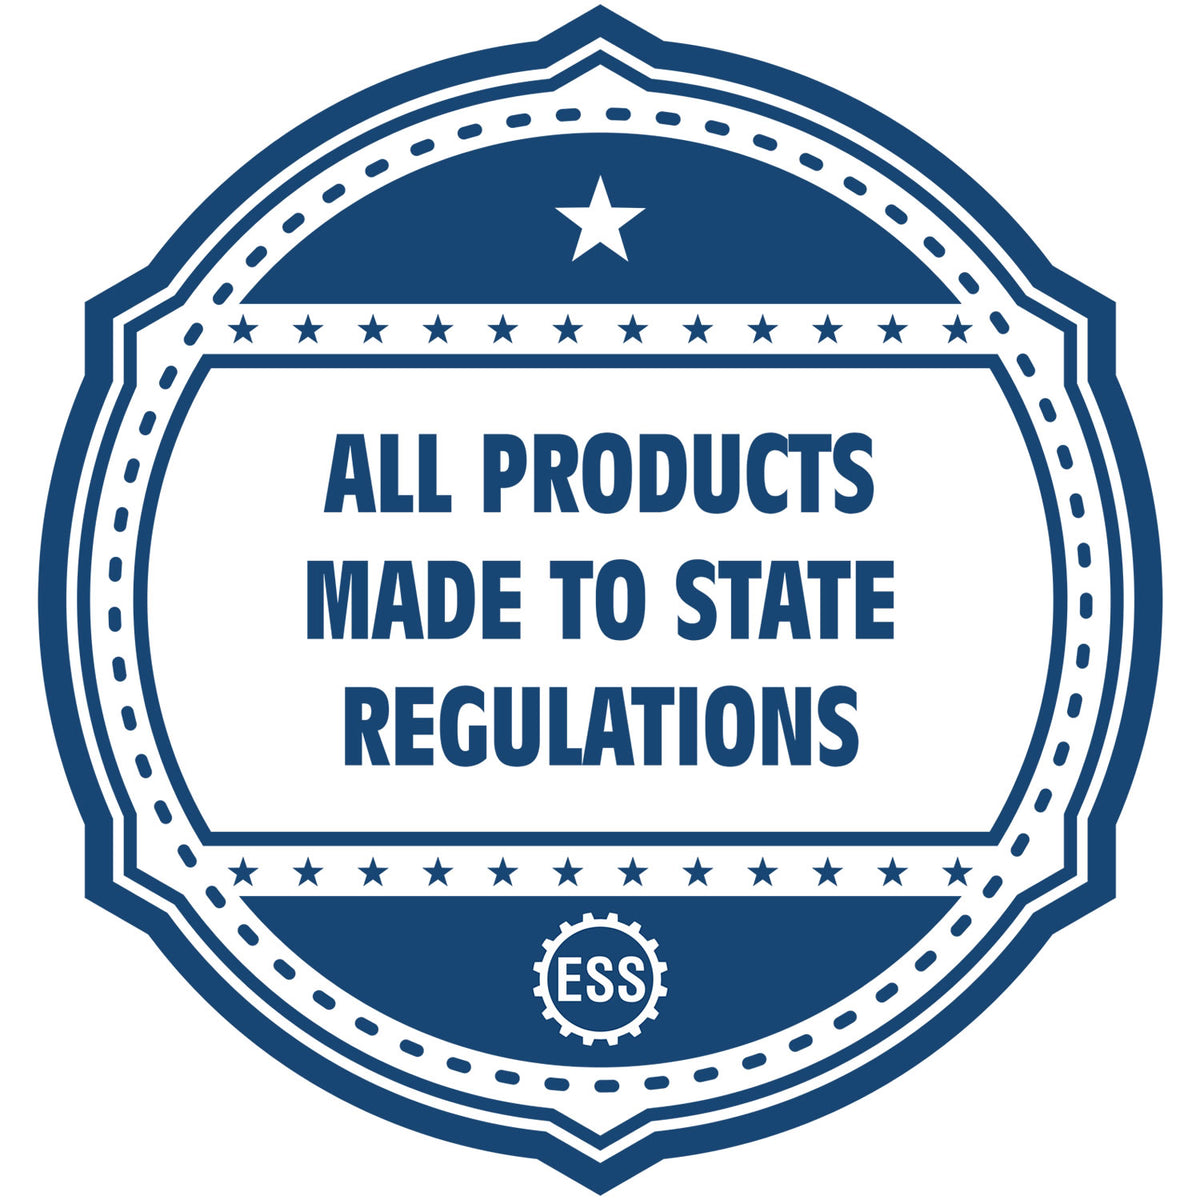 An icon or badge element for the Slim Pre-Inked Washington Land Surveyor Seal Stamp showing that this product is made in compliance with state regulations.